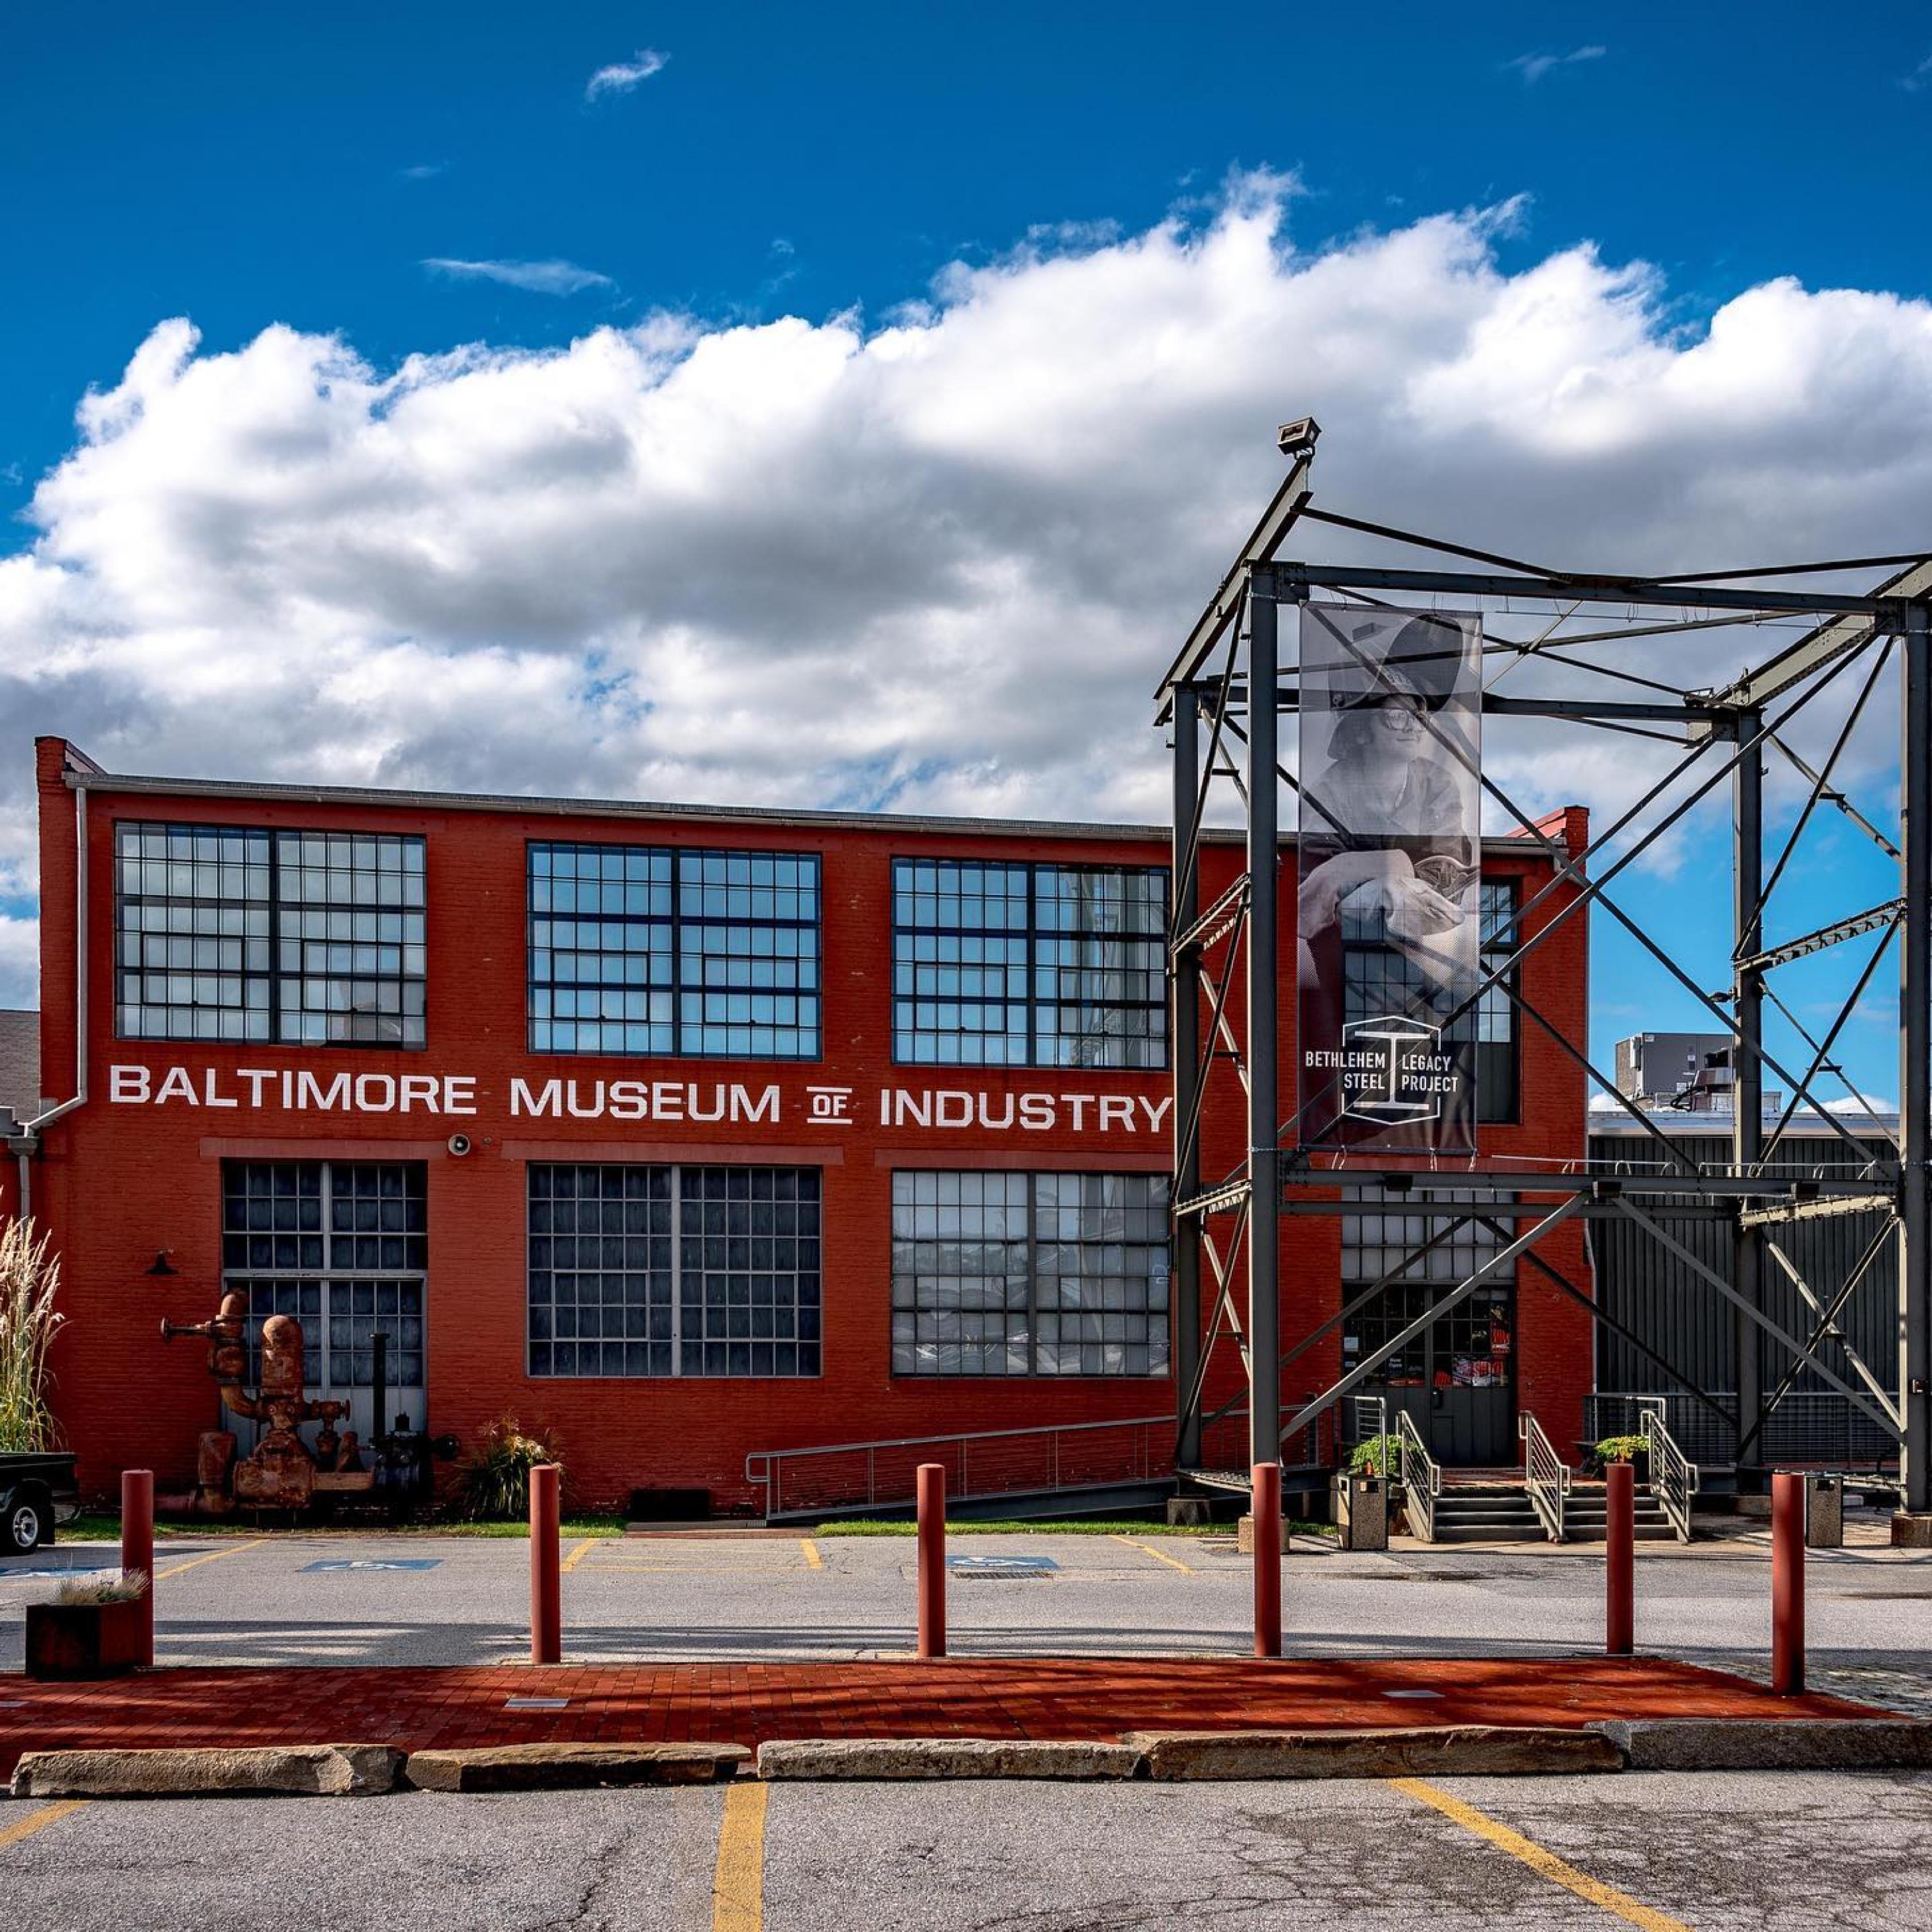 The Baltimore Museum of Industry